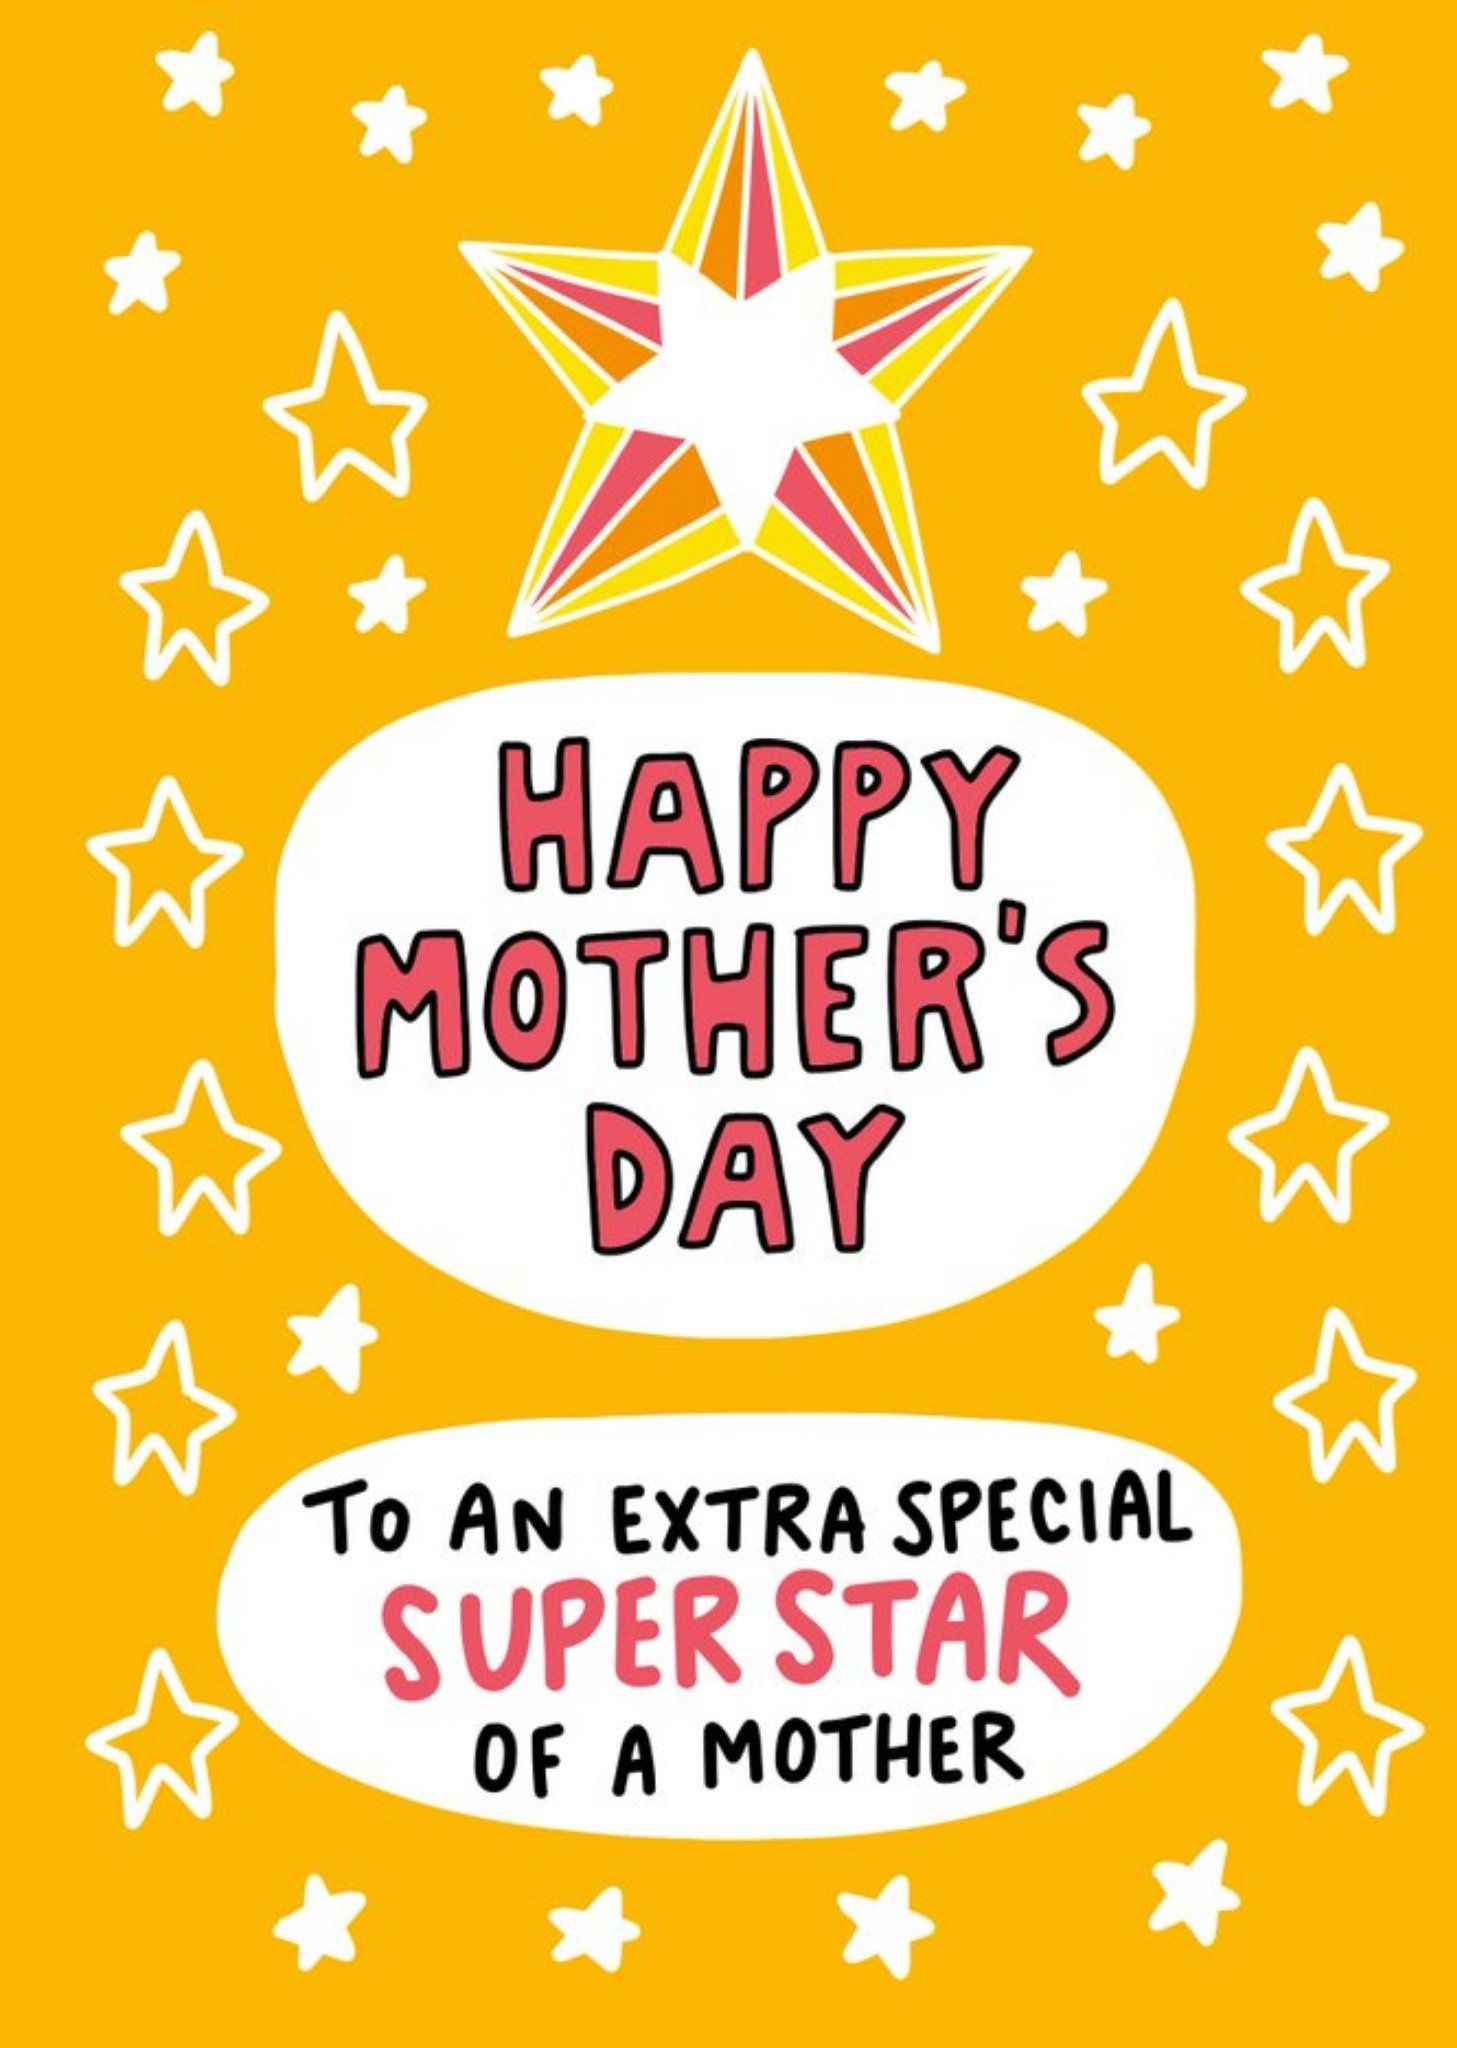 Moonpig Angela Chick Bright Yellow Typographic Mother's Day Card Ecard